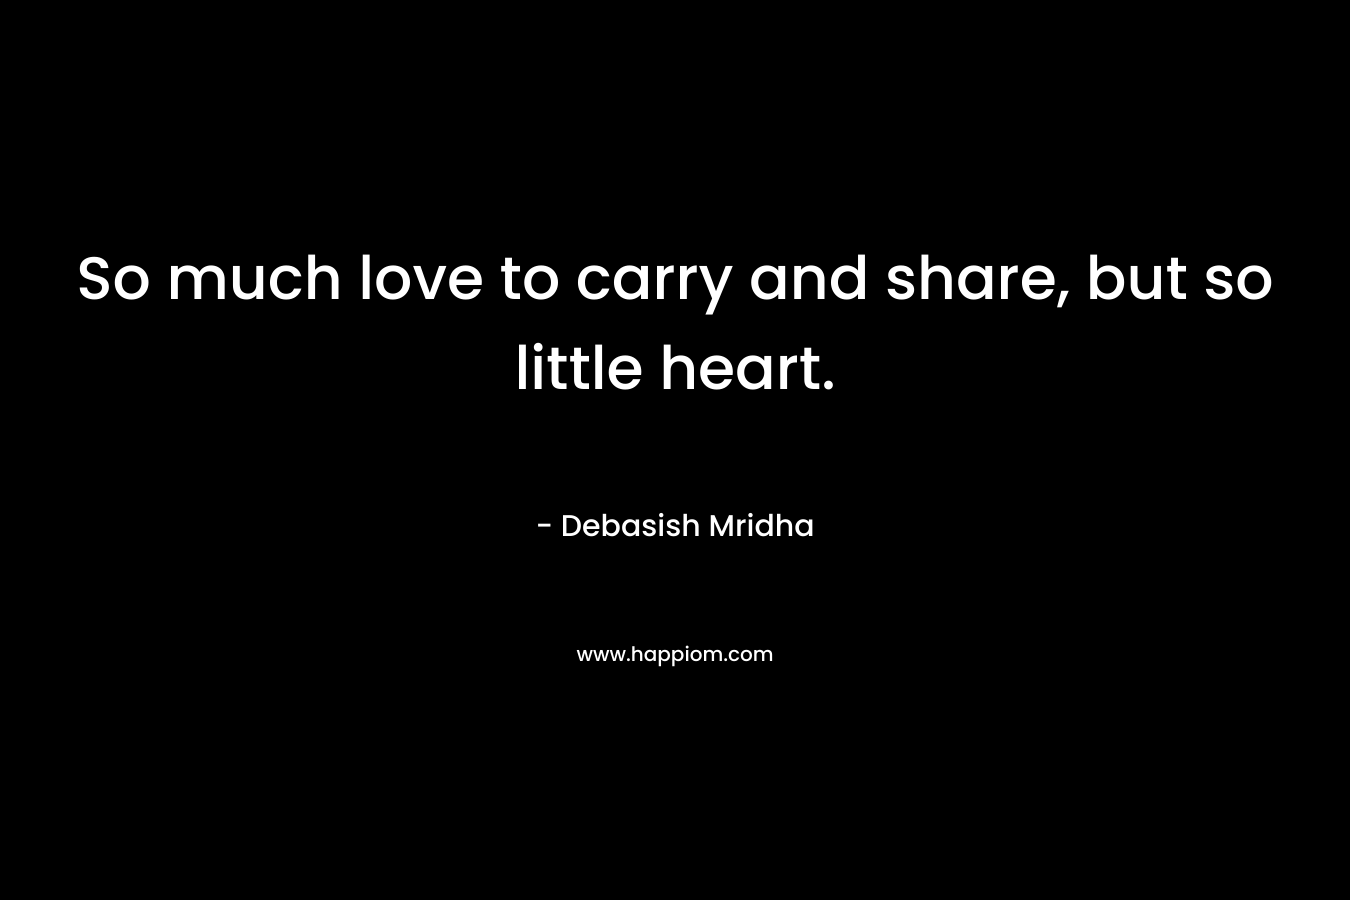 So much love to carry and share, but so little heart.